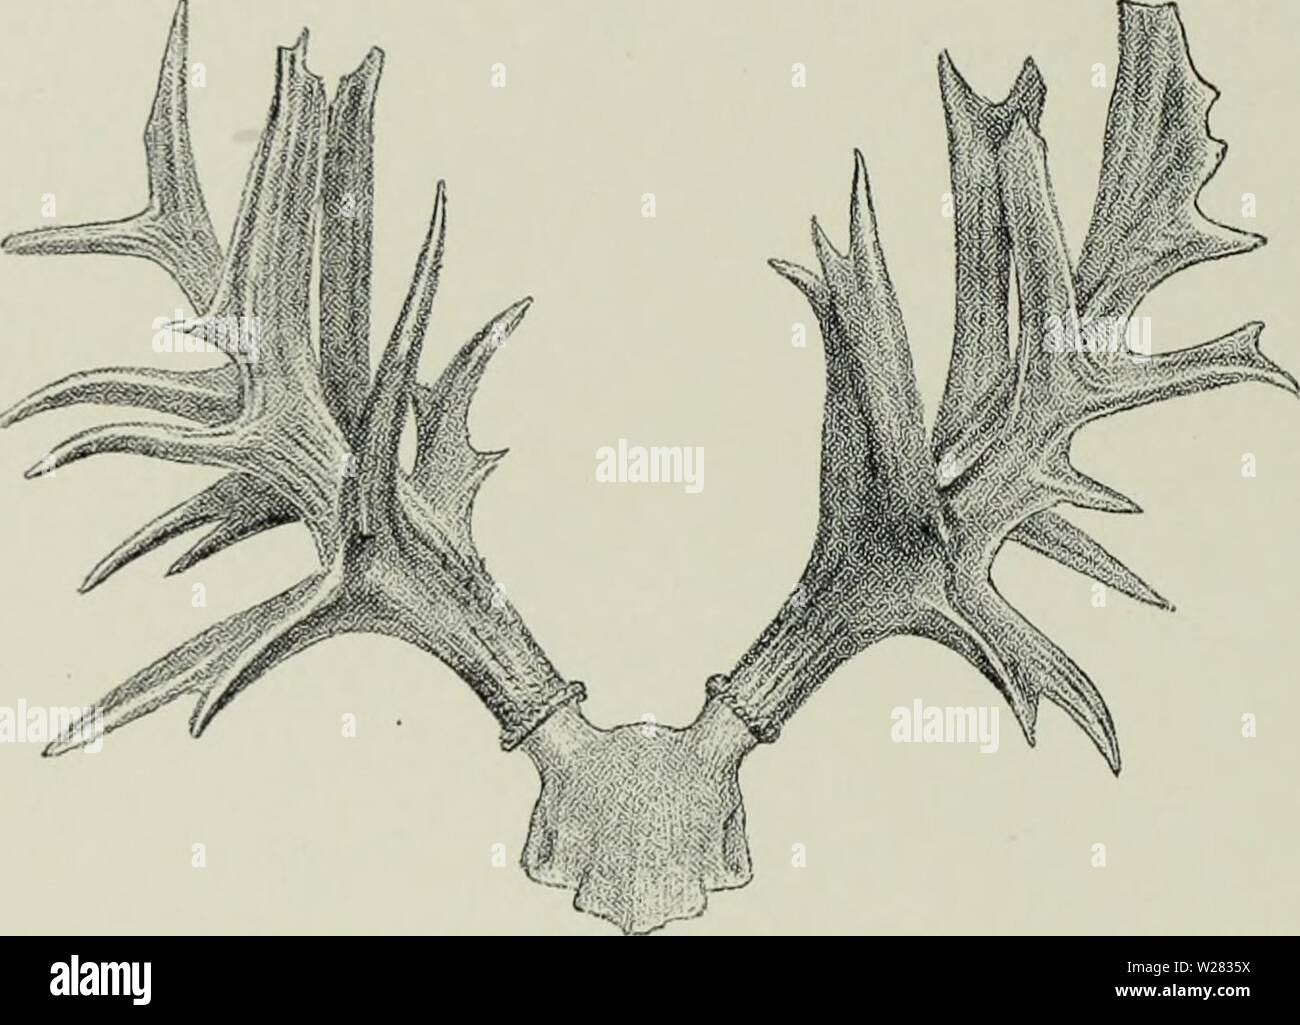 Archive image from page 351 of The deer of all lands;. The deer of all lands; a history of the family Cervidæ living and extinct  deerofalllandshi00lyde Year: 1898  286 American Deer Length along Outer Curve. Basal Circumference. Tip to Ti p. Widest inside. Number of Points. - i 24i 5 i 6 1 8 5-5 2 7 A 8 26 2 c j c-c 23 5i 4-5 6 ? 12 22f 20 20A 5-5 2 2 § si 25 28 2l| 5 16 5-5 Distribution. —In suitable localities throughout Brazil, and perhaps of Guiana, through Paraguay, Entre Rios and Uruguay to the Chaco, or I i hi    Fig. 75.—Malformed Antlers of Marsh-Deer. (Rowland Ward, Records of Big G Stock Photo